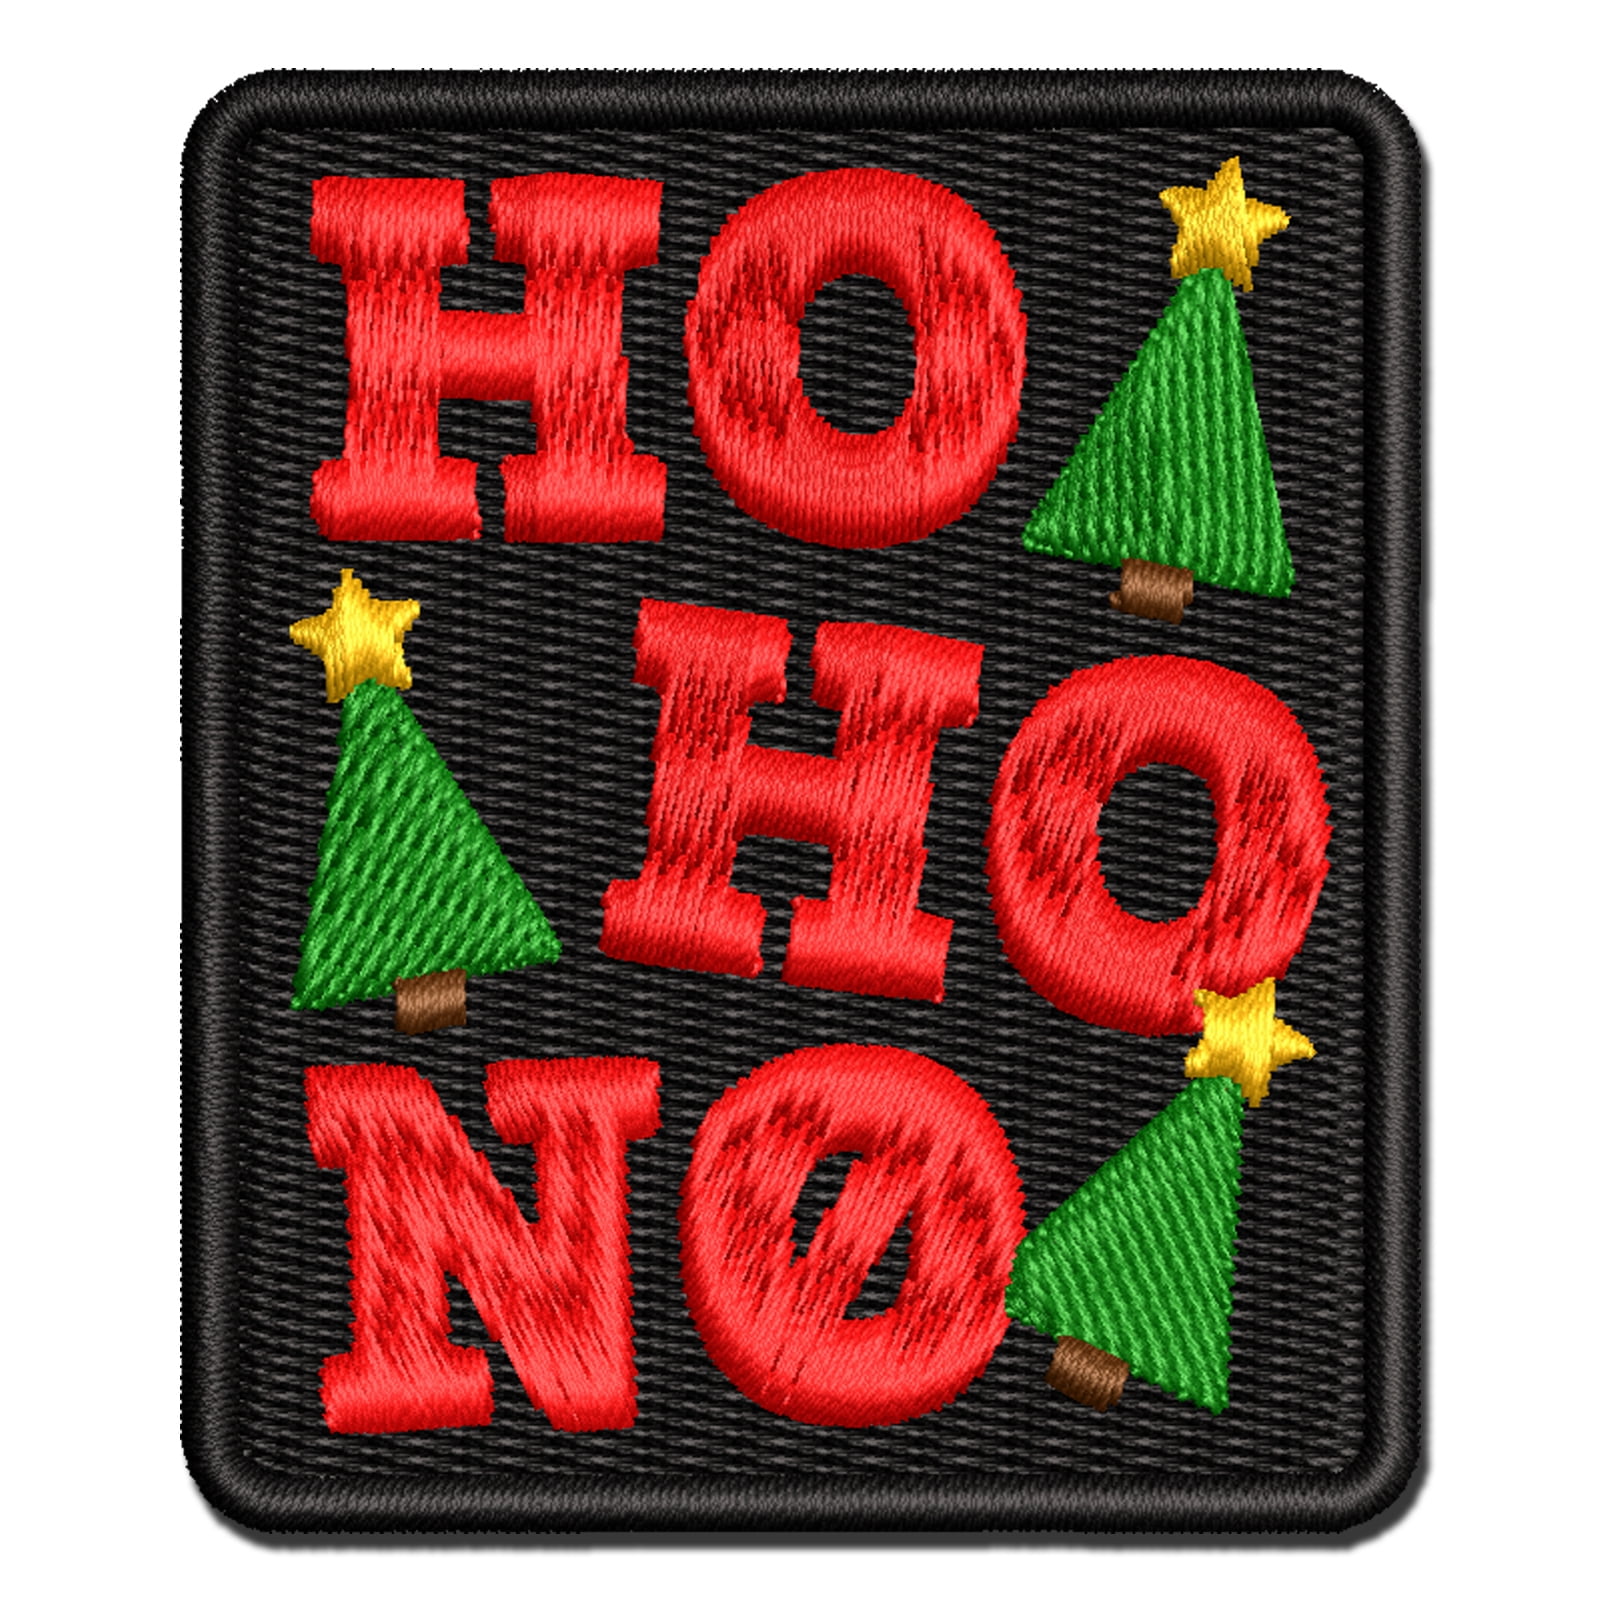 TINYSOME Christmas Iron on Patches Sew Applique Embroidered